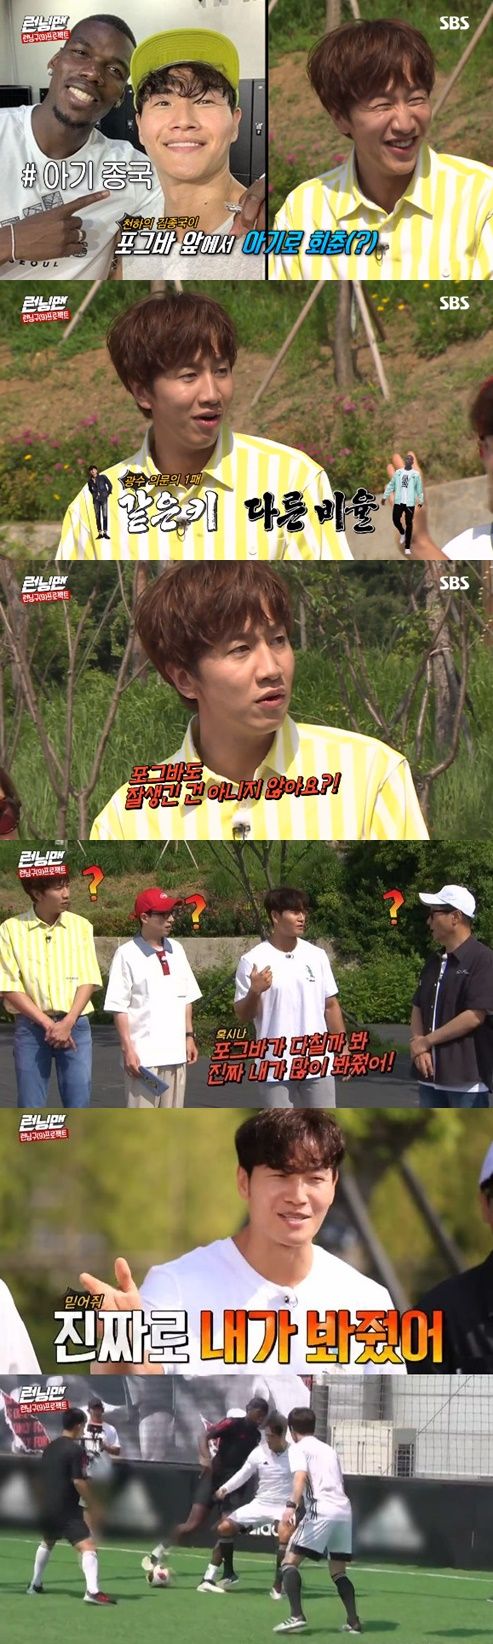 Running Man Kim Jong-kook met with soccer player Paul Florentin Pogba and told an anecdote.In the SBS entertainment program Running Man broadcasted on the 23rd, singer Cheongha and actor Seol In-ah appeared as guests while being decorated with the running area (9) project.On this day, Ji Seok-jin asked Kim Jong-kook, How do you know Paul Florentin Pogba?Paul Florentin Pogba is a soccer player from Manchester United FC, and recently he showed a picture of Kim Jong-kook together.Kim Jong-kook said, I met with my acquaintance to learn that Paul Florentin Pogba is coming to Korea.Lee Kwang-soo, who especially saw Kim Jong-kooks photo, said, I first saw my brother like a baby.Kim Jong-kook also hit back at Lee Kwang-soos mischievous teasing.Florentin Pogba is the same height as Lee Kwang-soo, but the ratio is completely different.My body is different and my face is different, he said.Lee Kwang-soo laughed and laughed, saying, Florentin Pogba is not such a handsome face.Kim Jong-kook, meanwhile, said, I played soccer with Florentin Pogba, and I watched a lot because Florentin Pogba was afraid of being hurt.Kim Jong-kook added: I didnt know and kicked Florentin Pogba, so surprised I pulled my foot out and fell down.